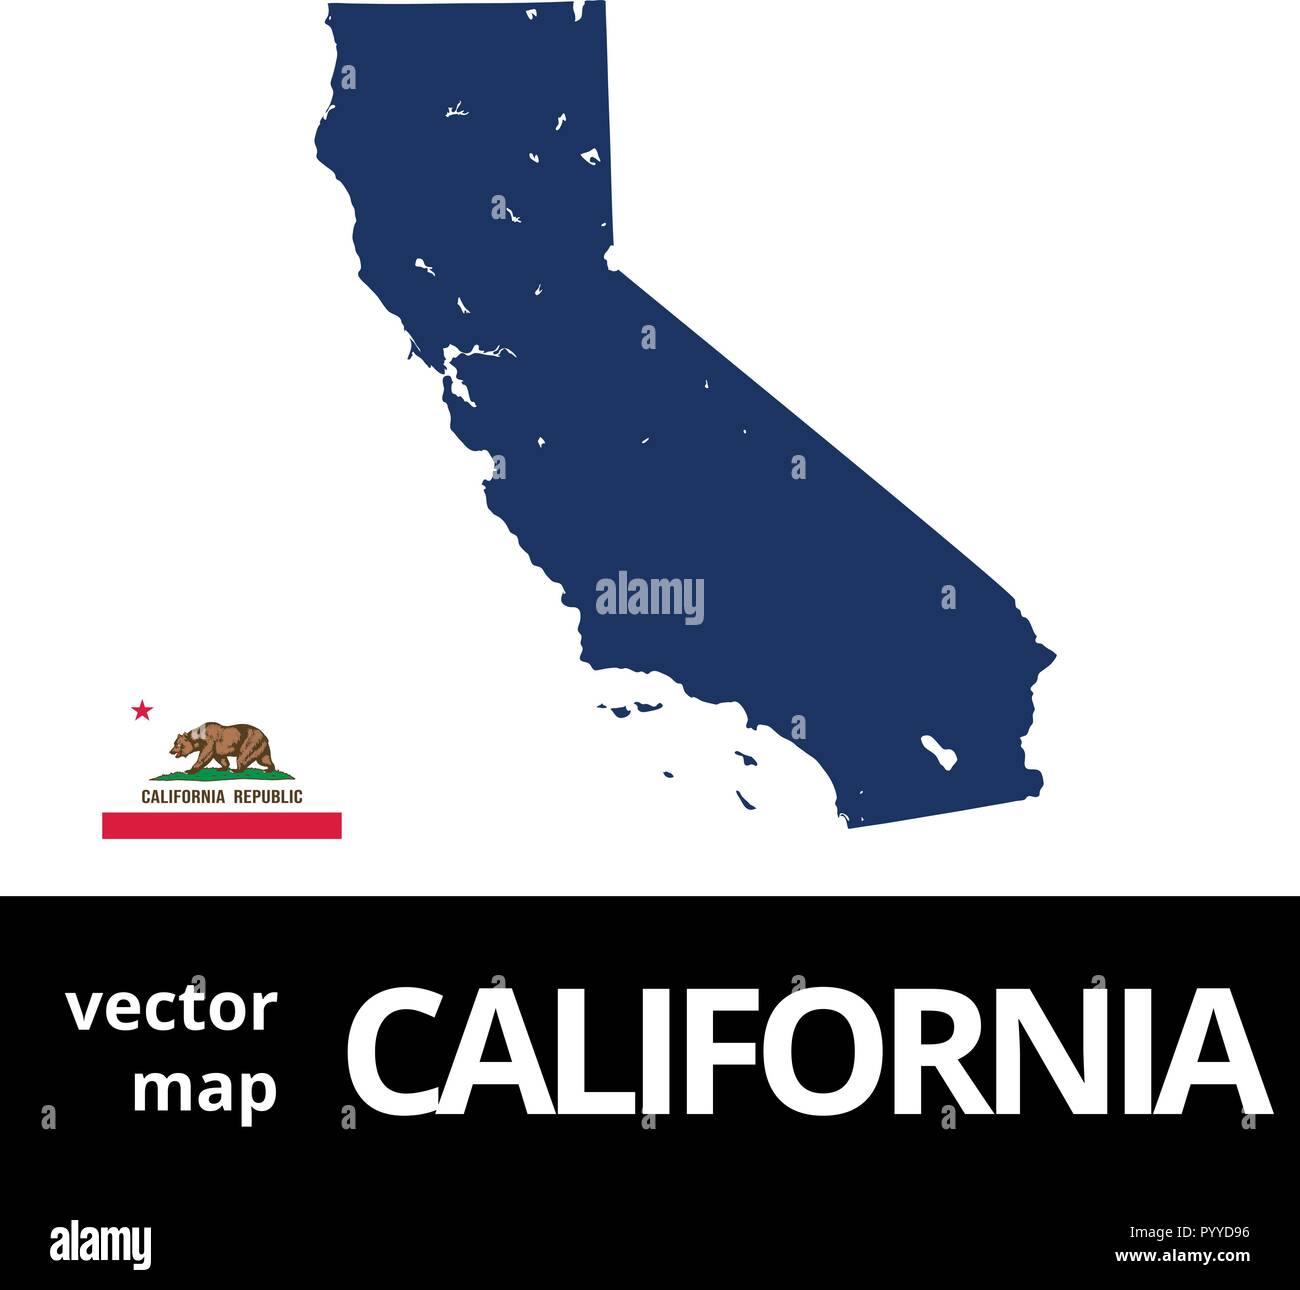 California vector map with state flag. Blue map on white background. Stock Vector